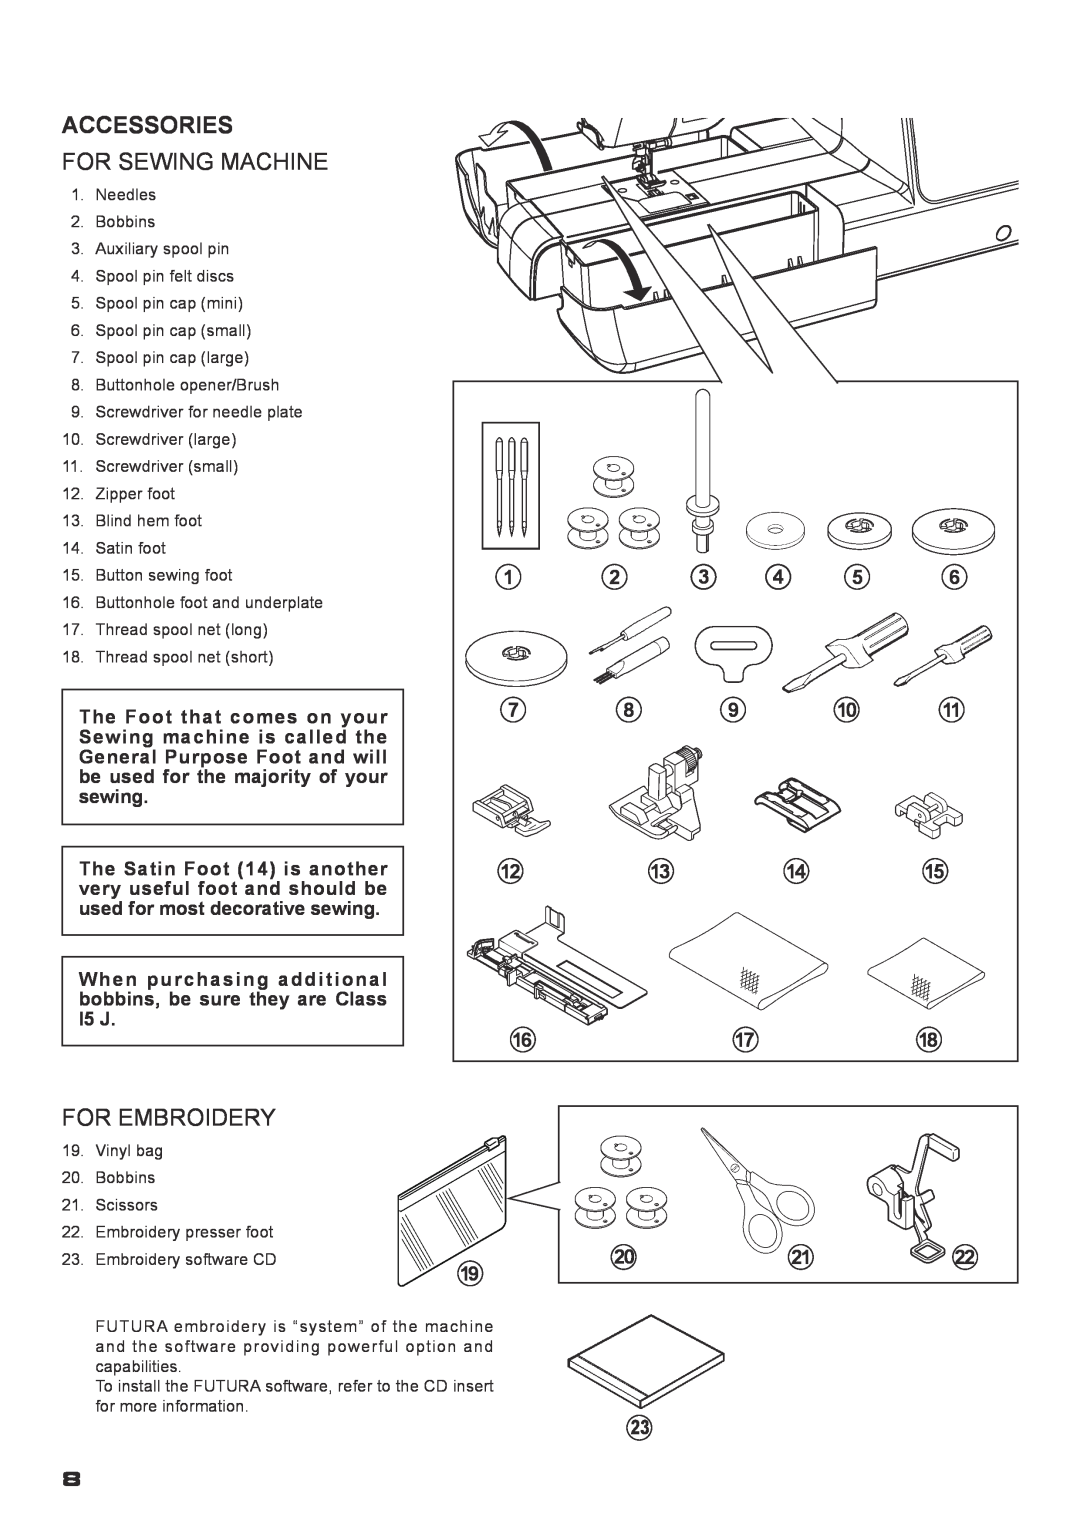 Singer XL-400 instruction manual Accessories, For Sewing Machine, For Embroidery 